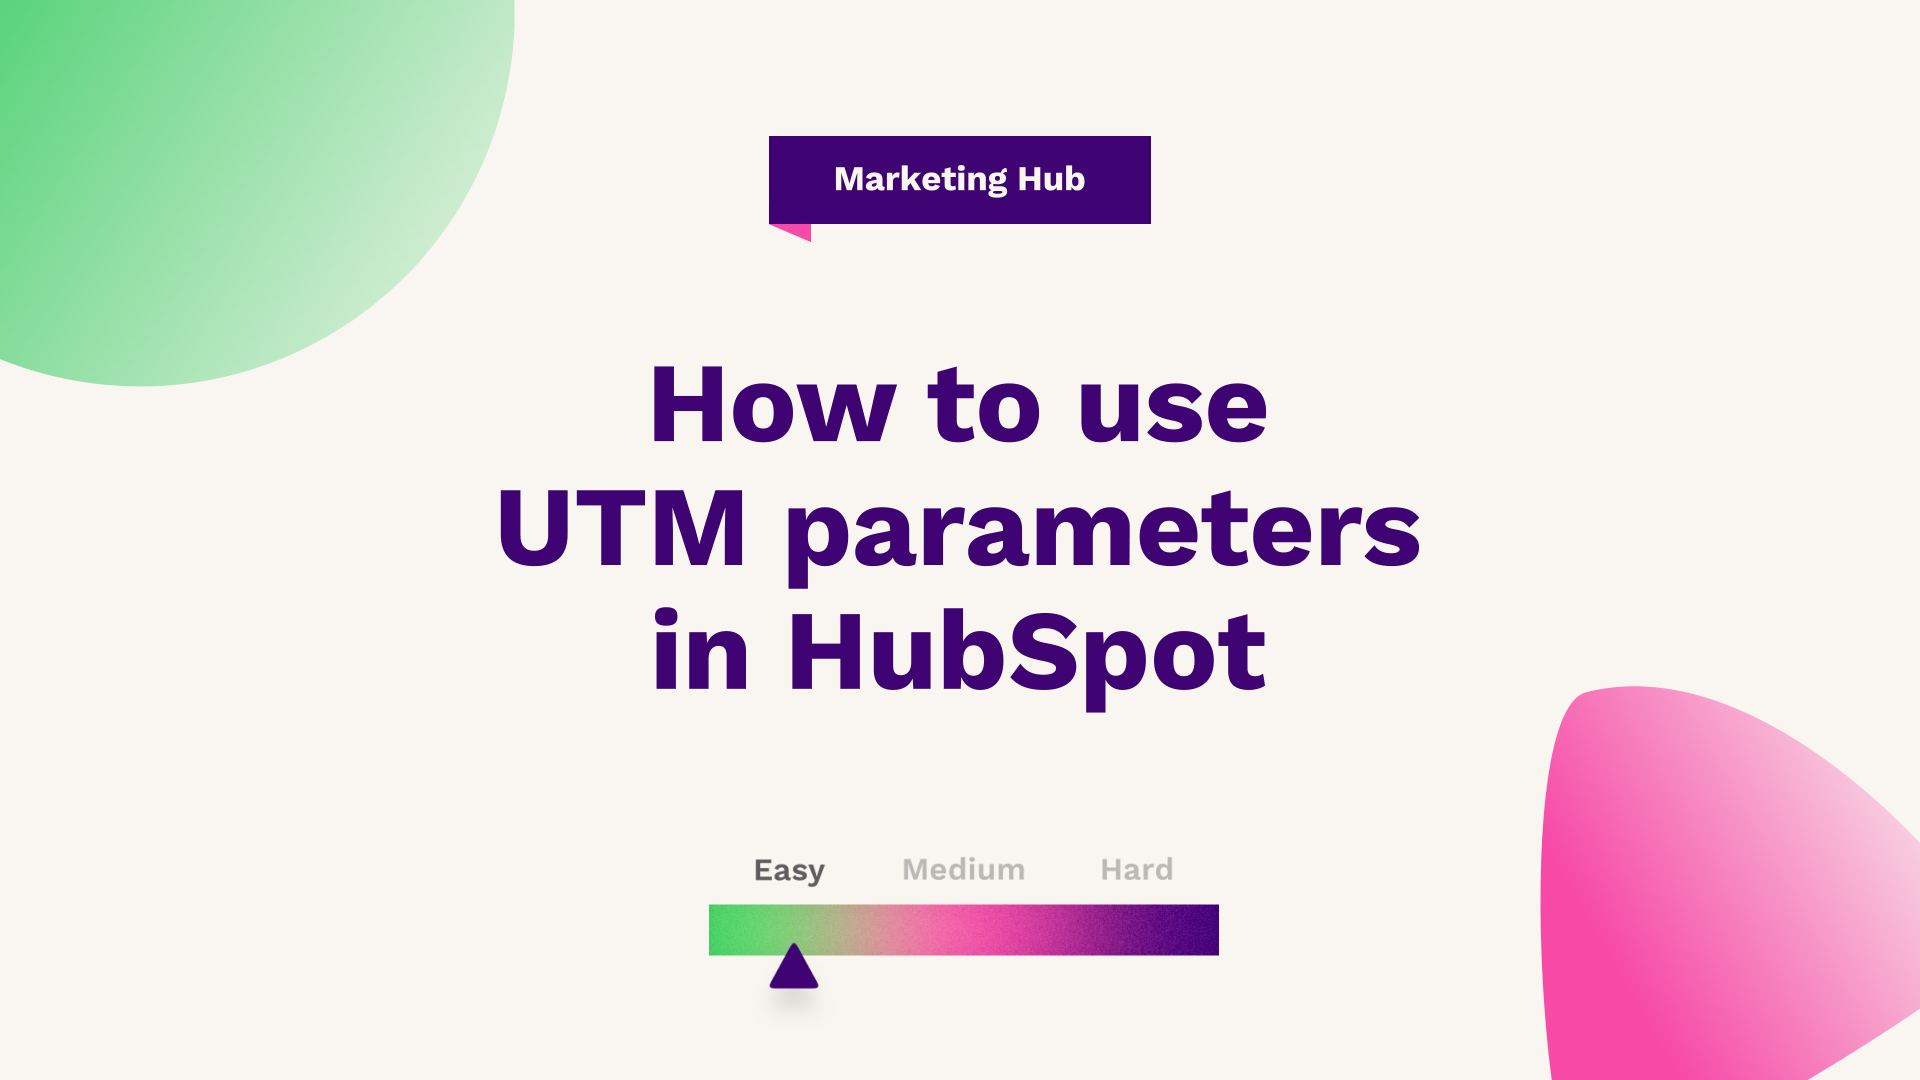 How to use UTM parameters in HubSpot